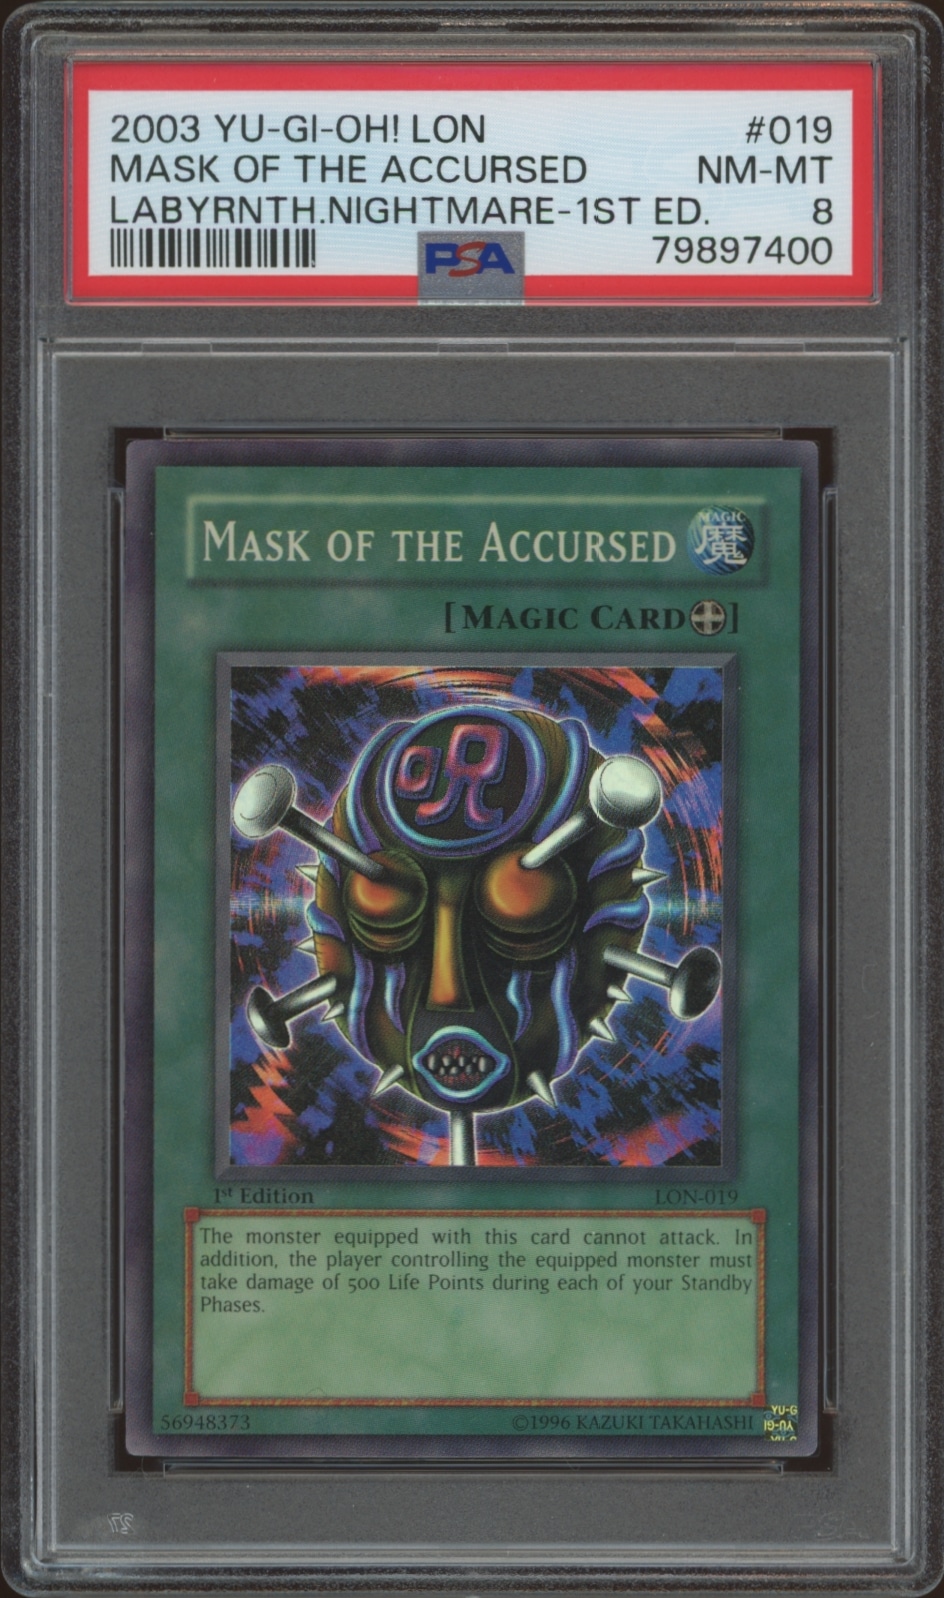 PSA-graded Mask of the Accursed Yu-Gi-Oh! card from 2003 Labyrinth of Nightmare set.